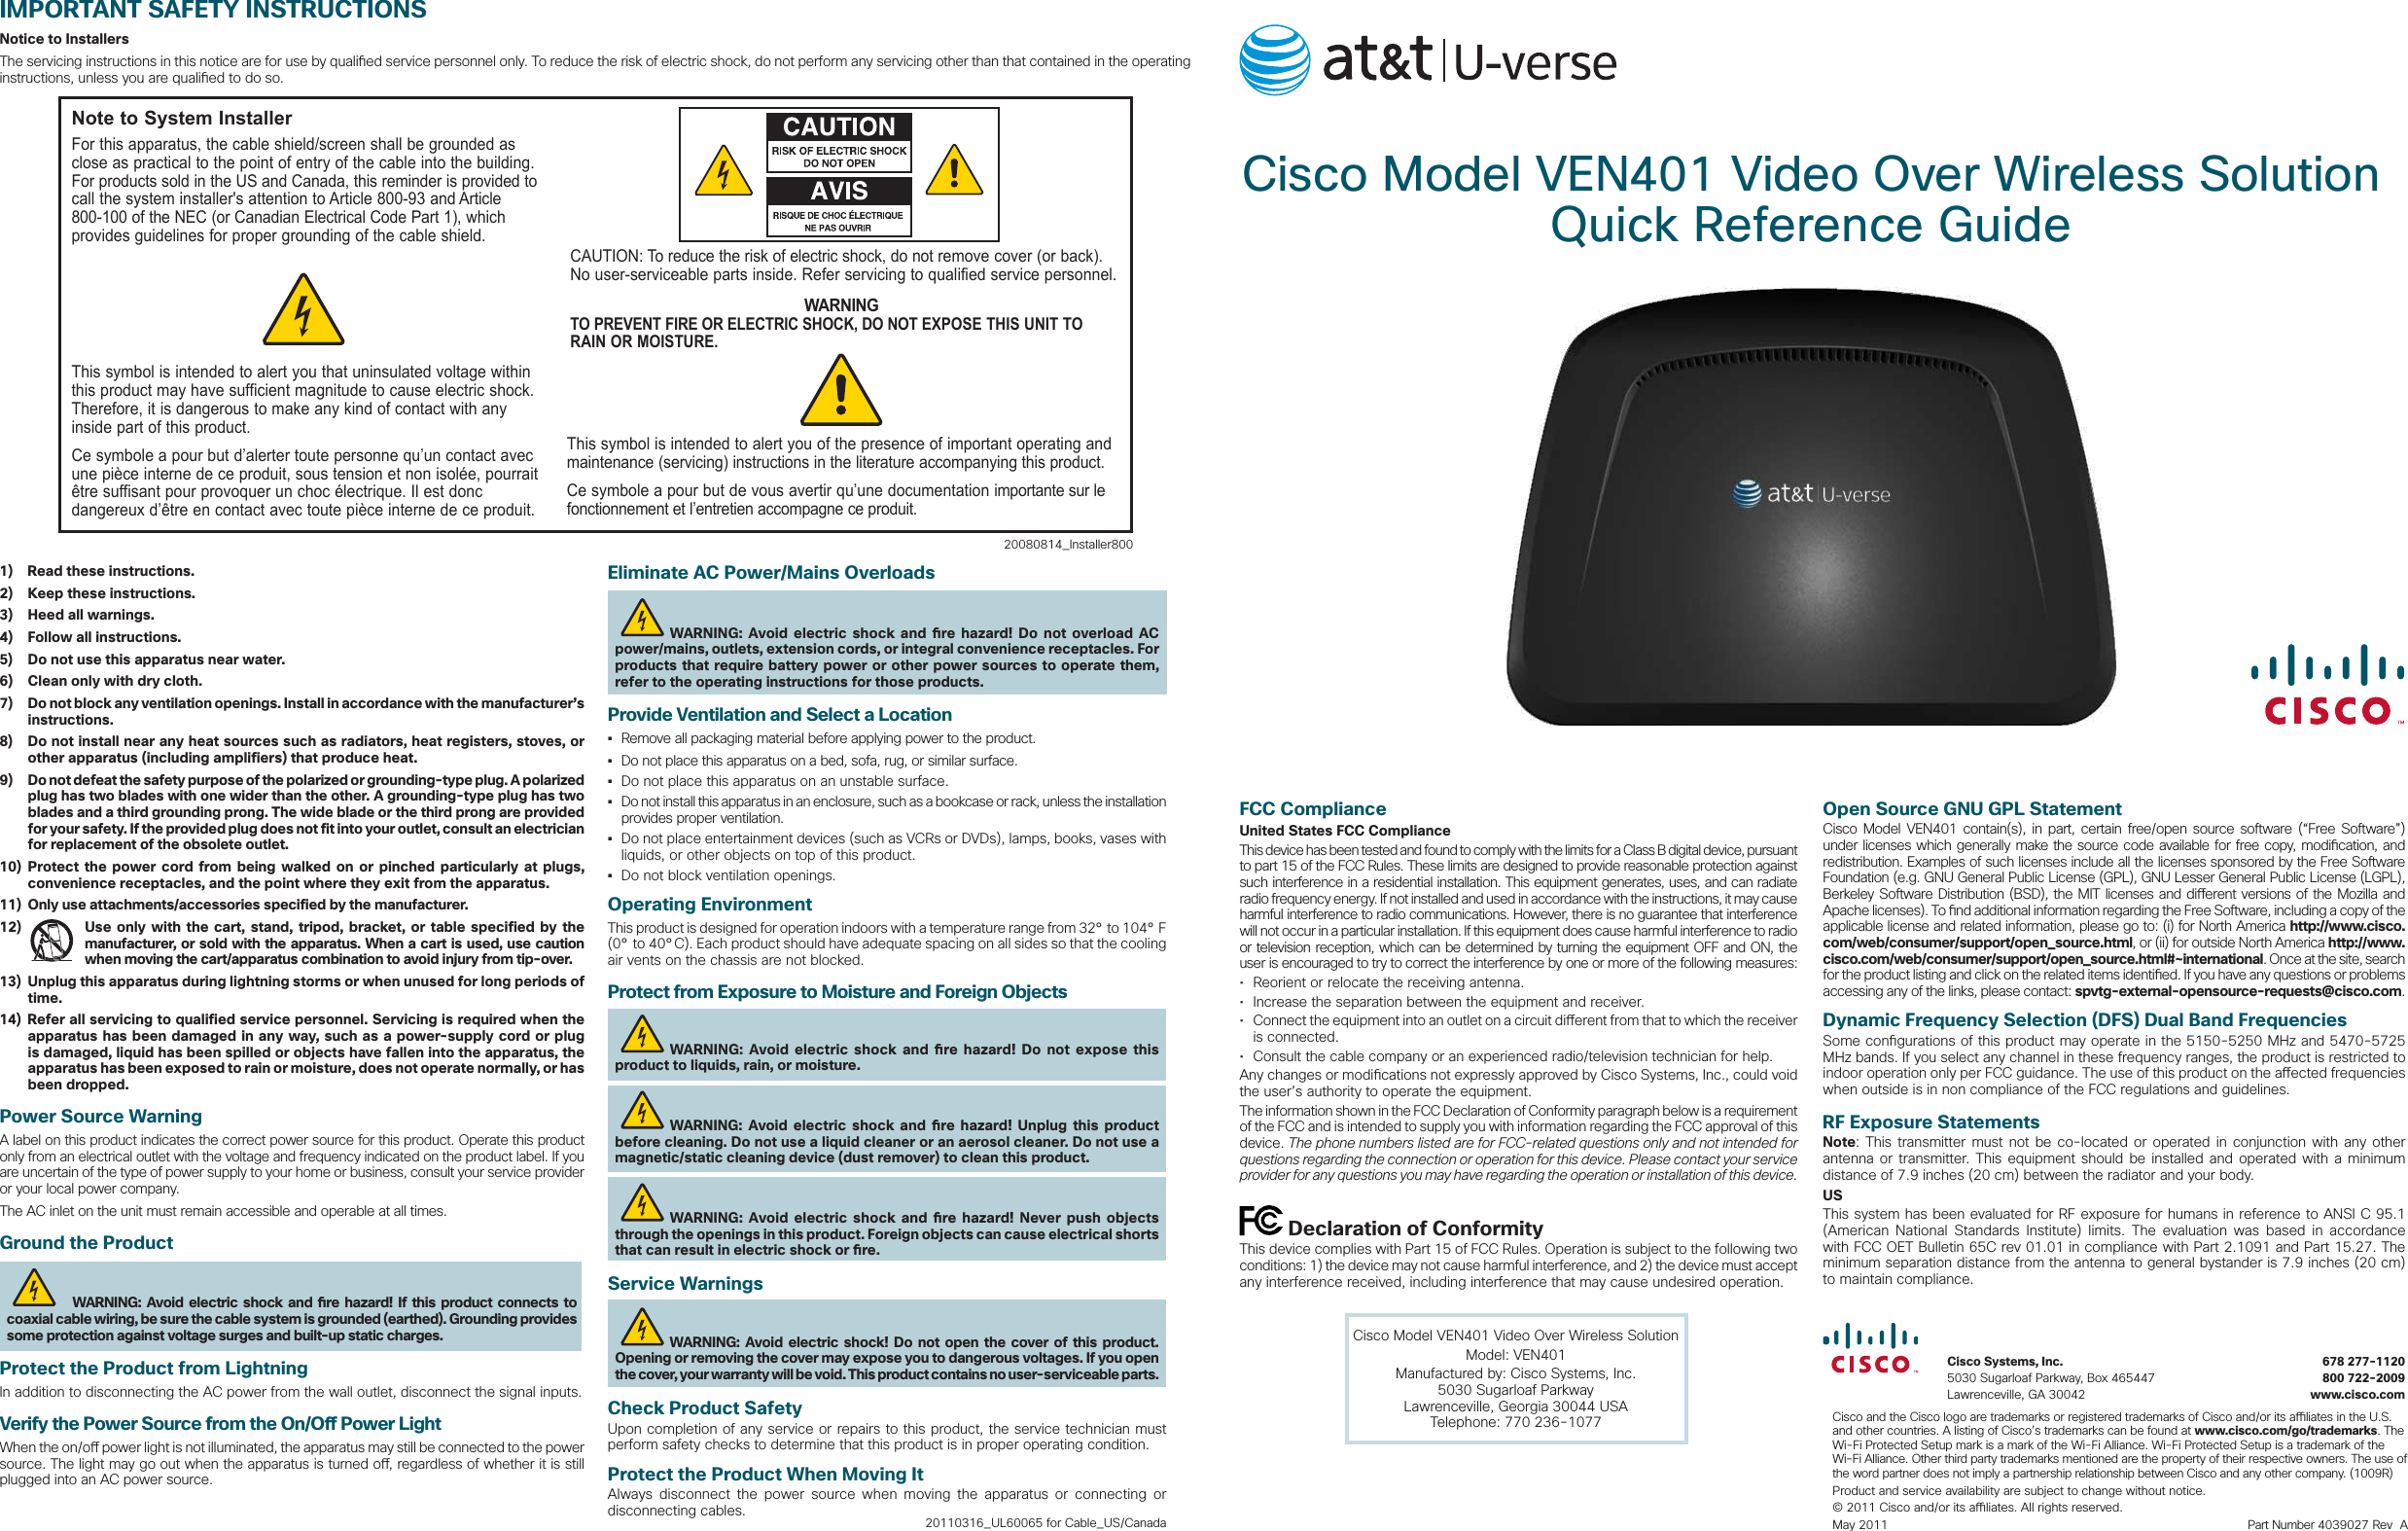  Cisco Model VEN401 Video Over Wireless Solution Quick Reference Guide  Cisco Systems, Inc.  678 277-1120  5030 Sugarloaf Parkway, Box 465447  800 722-2009  Lawrenceville, GA 30042  www.cisco.comCisco and the Cisco logo are trademarks or registered trademarks of Cisco and/or its a  liates in the U.S. and other countries. A listing of Cisco’s trademarks can be found at www.cisco.com/go/trademarks. The Wi-Fi Protected Setup mark is a mark of the Wi-Fi Alliance. Wi-Fi Protected Setup is a trademark of the Wi-Fi Alliance. Other third party trademarks mentioned are the property of their respective owners. The use of the word partner does not imply a partnership relationship between Cisco and any other company. (1009R)Product and service availability are subject to change without notice.© 2011 Cisco and/or its a  liates. All rights reserved.May 2011    Part Number 4039027 Rev  AIMPORTANT SAFETY INSTRUCTIONSNotice to InstallersThe servicing instructions in this notice are for use by quali ed service personnel only. To reduce the risk of electric shock, do not perform any servicing other than that contained in the operating instructions, unless you are quali ed to do so.20080814_Installer800Note to System InstallerFor this apparatus, the cable shield/screen shall be grounded as close as practical to the point of entry of the cable into the building. For products sold in the US and Canada, this reminder is provided to call the system installer&apos;s attention to Article 800-93 and Article 800-100 of the NEC (or Canadian Electrical Code Part 1), which provides guidelines for proper grounding of the cable shield.This symbol is intended to alert you that uninsulated voltage within this product may have sufficient magnitude to cause electric shock. Therefore, it is dangerous to make any kind of contact with any inside part of this product.Ce symbole a pour but d’alerter toute personne qu’un contact avec une pièce interne de ce produit, sous tension et non isolée, pourrait être suffisant pour provoquer un choc électrique. Il est donc dangereux d’être en contact avec toute pièce interne de ce produit.This symbol is intended to alert you of the presence of important operating and maintenance (servicing) instructions in the literature accompanying this product. Ce symbole a pour but de vous avertir qu’une documentation importante sur le fonctionnement et l’entretien accompagne ce produit.CAUTION: To reduce the risk of electric shock, do not remove cover (or back). No user-serviceable parts inside. Refer servicing to qualified service personnel.WARNINGTO PREVENT FIRE OR ELECTRIC SHOCK, DO NOT EXPOSE THIS UNIT TO RAIN OR MOISTURE.1)  Read these instructions.2)  Keep these instructions.3)  Heed all warnings.4)  Follow all instructions.5)  Do not use this apparatus near water.6)  Clean only with dry cloth.7)  Do not block any ventilation openings. Install in accordance with the manufacturer’s instructions.8)  Do not install near any heat sources such as radiators, heat registers, stoves, or other apparatus (including amplifiers) that produce heat.9)  Do not defeat the safety purpose of the polarized or grounding-type plug. A polarized plug has two blades with one wider than the other. A grounding-type plug has two blades and a third grounding prong. The wide blade or the third prong are provided for your safety. If the provided plug does not fit into your outlet, consult an electrician for replacement of the obsolete outlet.10) Protect the power cord from being walked on or pinched particularly at plugs, convenience receptacles, and the point where they exit from the apparatus.11)  Only use attachments/accessories specified by the manufacturer.12)  Use only with the cart, stand, tripod, bracket, or table specified by the manufacturer, or sold with the apparatus. When a cart is used, use caution when moving the cart/apparatus combination to avoid injury from tip-over.13)  Unplug this apparatus during lightning storms or when unused for long periods of time.14) Refer all servicing to qualified service personnel. Servicing is required when the apparatus has been damaged in any way, such as a power-supply cord or plug is damaged, liquid has been spilled or objects have fallen into the apparatus, the apparatus has been exposed to rain or moisture, does not operate normally, or has been dropped.Power Source WarningA label on this product indicates the correct power source for this product. Operate this product only from an electrical outlet with the voltage and frequency indicated on the product label. If you are uncertain of the type of power supply to your home or business, consult your service provider or your local power company.The AC inlet on the unit must remain accessible and operable at all times.Ground the Product  WARNING: Avoid electric shock and  re hazard! If this product connects to coaxial cable wiring, be sure the cable system is grounded (earthed). Grounding provides some protection against voltage surges and built-up static charges.Protect the Product from LightningIn addition to disconnecting the AC power from the wall outlet, disconnect the signal inputs.Verify the Power Source from the On/O  Power LightWhen the on/o  power light is not illuminated, the apparatus may still be connected to the power source. The light may go out when the apparatus is turned o , regardless of whether it is still plugged into an AC power source.      Eliminate AC Power/Mains OverloadsWARNING: Avoid electric shock and  re hazard! Do not overload AC power/mains, outlets, extension cords, or integral convenience receptacles. For products that require battery power or other power sources to operate them, refer to the operating instructions for those products.Provide Ventilation and Select a Location•  Remove all packaging material before applying power to the product. •  Do not place this apparatus on a bed, sofa, rug, or similar surface.•  Do not place this apparatus on an unstable surface.•  Do not install this apparatus in an enclosure, such as a bookcase or rack, unless the installation provides proper ventilation.•  Do not place entertainment devices (such as VCRs or DVDs), lamps, books, vases with liquids, or other objects on top of this product.•  Do not block ventilation openings.Operating EnvironmentThis product is designed for operation indoors with a temperature range from 32° to 104° F (0° to 40°C). Each product should have adequate spacing on all sides so that the cooling air vents on the chassis are not blocked.Protect from Exposure to Moisture and Foreign ObjectsWARNING: Avoid electric shock and  re hazard! Do not expose this product to liquids, rain, or moisture.WARNING: Avoid electric shock and  re hazard! Unplug this product before cleaning. Do not use a liquid cleaner or an aerosol cleaner. Do not use a magnetic/static cleaning device (dust remover) to clean this product.WARNING: Avoid electric shock and  re hazard! Never push objects through the openings in this product. Foreign objects can cause electrical shorts that can result in electric shock or  re. Service WarningsWARNING: Avoid electric shock! Do not open the cover of this product. Opening or removing the cover may expose you to dangerous voltages. If you open the cover, your warranty will be void. This product contains no user-serviceable parts.Check Product SafetyUpon completion of any service or repairs to this product, the service technician must perform safety checks to determine that this product is in proper operating condition.Protect the Product When Moving ItAlways disconnect the power source when moving the apparatus or connecting or disconnecting cables.  20110316_UL60065 for Cable_US/CanadaFCC ComplianceUnited States FCC ComplianceThis device has been tested and found to comply with the limits for a Class B digital device, pursuant to part 15 of the FCC Rules. These limits are designed to provide reasonable protection against such interference in a residential installation. This equipment generates, uses, and can radiate radio frequency energy. If not installed and used in accordance with the instructions, it may cause harmful interference to radio communications. However, there is no guarantee that interference will not occur in a particular installation. If this equipment does cause harmful interference to radio or television reception, which can be determined by turning the equipment OFF and ON, the user is encouraged to try to correct the interference by one or more of the following measures:•  Reorient or relocate the receiving antenna.•  Increase the separation between the equipment and receiver.•  Connect the equipment into an outlet on a circuit di erent from that to which the receiver is connected.•  Consult the cable company or an experienced radio/television technician for help.Any changes or modi cations not expressly approved by Cisco Systems, Inc., could void the user’s authority to operate the equipment.The information shown in the FCC Declaration of Conformity paragraph below is a requirement of the FCC and is intended to supply you with information regarding the FCC approval of this device. The phone numbers listed are for FCC-related questions only and not intended for questions regarding the connection or operation for this device. Please contact your service provider for any questions you may have regarding the operation or installation of this device. Declaration of ConformityThis device complies with Part 15 of FCC Rules. Operation is subject to the following two conditions: 1) the device may not cause harmful interference, and 2) the device must accept any interference received, including interference that may cause undesired operation.Cisco Model VEN401 Video Over Wireless SolutionModel: VEN401Manufactured by: Cisco Systems, Inc.5030 Sugarloaf ParkwayLawrenceville, Georgia 30044 USATelephone: 770 236-1077Open Source GNU GPL StatementCisco Model VEN401 contain(s), in part, certain free/open source software (“Free Software”) under licenses which generally make the source code available for free copy, modi cation, and redistribution. Examples of such licenses include all the licenses sponsored by the Free Software Foundation (e.g. GNU General Public License (GPL), GNU Lesser General Public License (LGPL), Berkeley Software Distribution (BSD), the MIT licenses and di erent versions of the Mozilla and Apache licenses). To  nd additional information regarding the Free Software, including a copy of the applicable license and related information, please go to: (i) for North America http://www.cisco.com/web/consumer/support/open_source.html, or (ii) for outside North America http://www.cisco.com/web/consumer/support/open_source.html#~international. Once at the site, search for the product listing and click on the related items identi ed. If you have any questions or problems accessing any of the links, please contact: spvtg-external-opensource-requests@cisco.com.Dynamic Frequency Selection (DFS) Dual Band Frequencies Some con gurations of this product may operate in the 5150-5250 MHz and 5470-5725 MHz bands. If you select any channel in these frequency ranges, the product is restricted to indoor operation only per FCC guidance. The use of this product on the a ected frequencies when outside is in non compliance of the FCC regulations and guidelines. RF Exposure Statements Note: This transmitter must not be co-located or operated in conjunction with any other antenna or transmitter. This equipment should be installed and operated with a minimum distance of 7.9 inches (20 cm) between the radiator and your body. US This system has been evaluated for RF exposure for humans in reference to ANSI C 95.1 (American National Standards Institute) limits. The evaluation was based in accordance with FCC OET Bulletin 65C rev 01.01 in compliance with Part 2.1091 and Part 15.27. The minimum separation distance from the antenna to general bystander is 7.9 inches (20 cm) to maintain compliance.